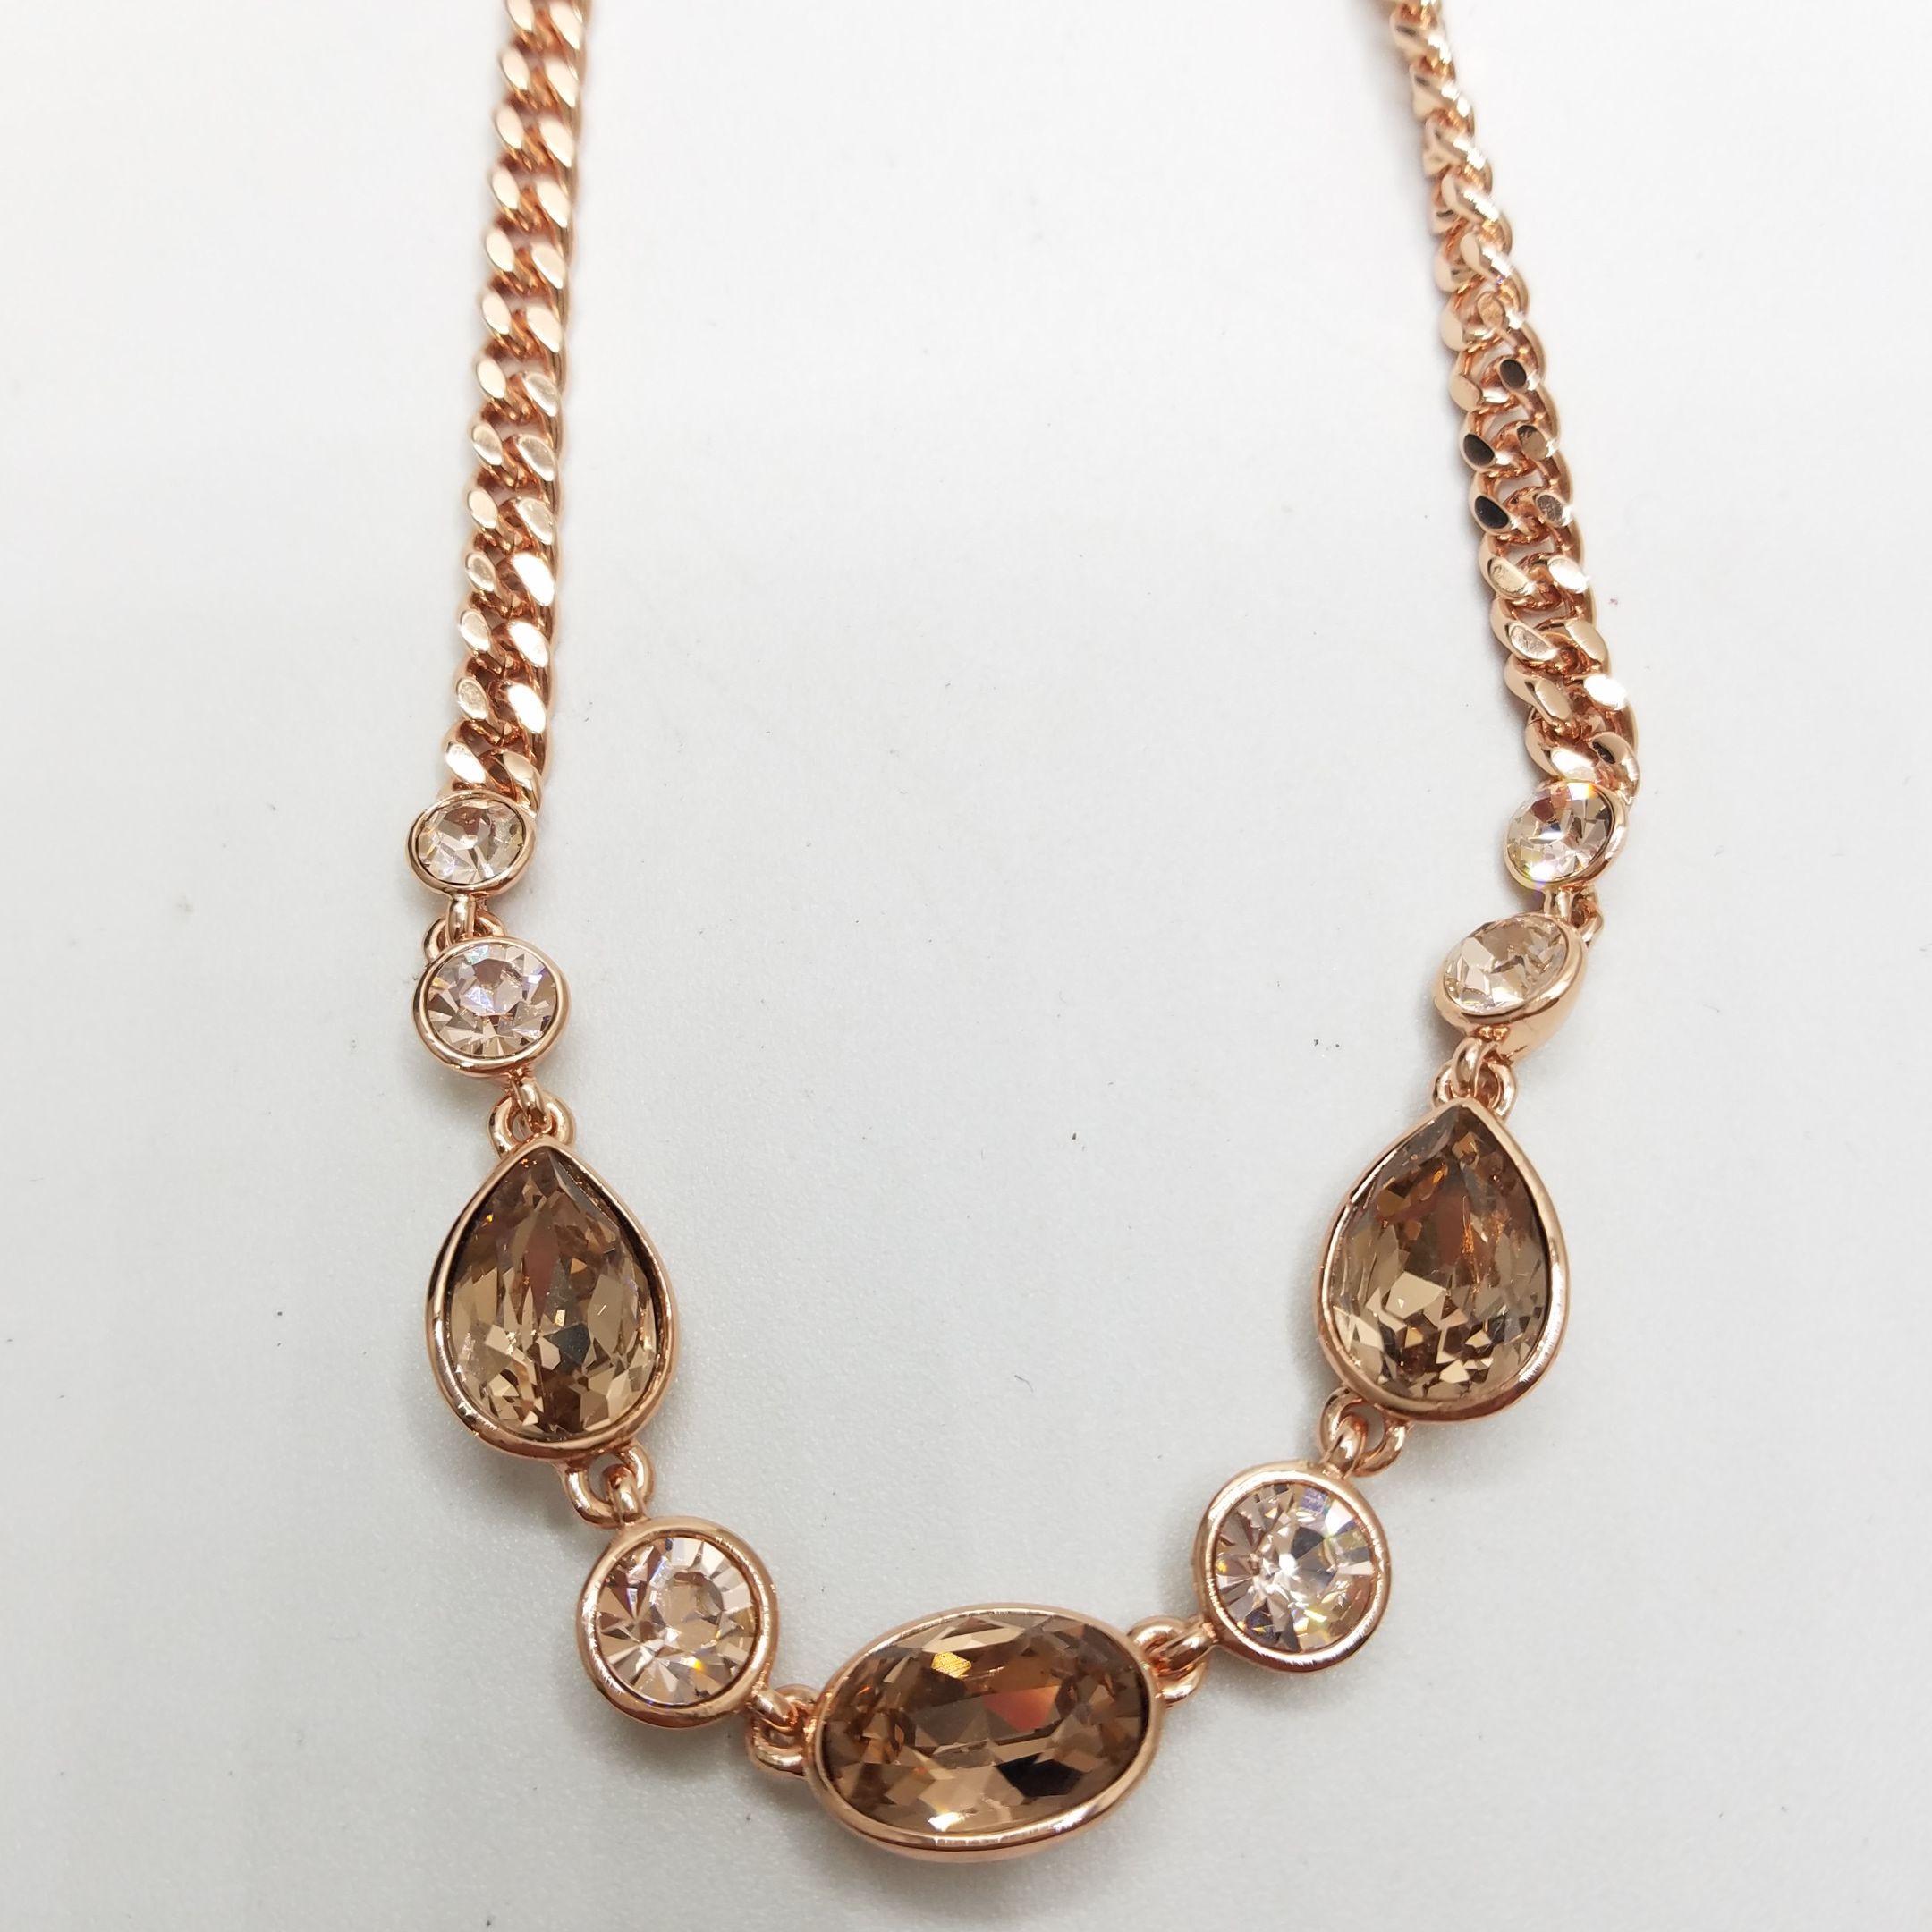 Givenchy Gold-Tone Pear-Shape Crystal Lariat Necklace, 16